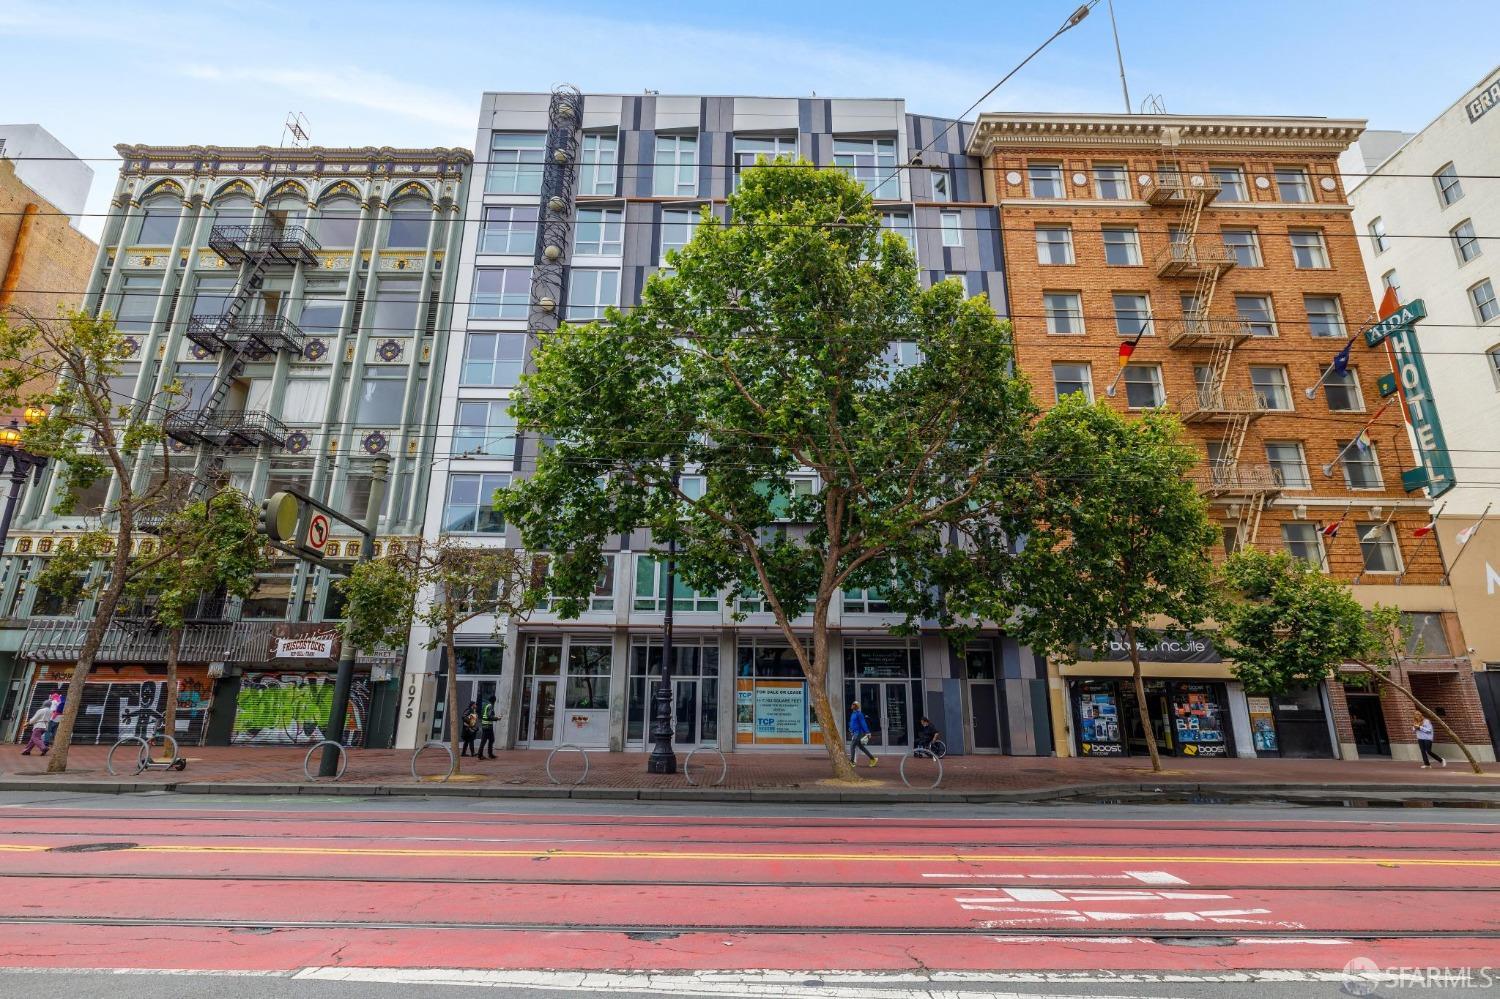 Photo of 1075 Market St #507 in San Francisco, CA